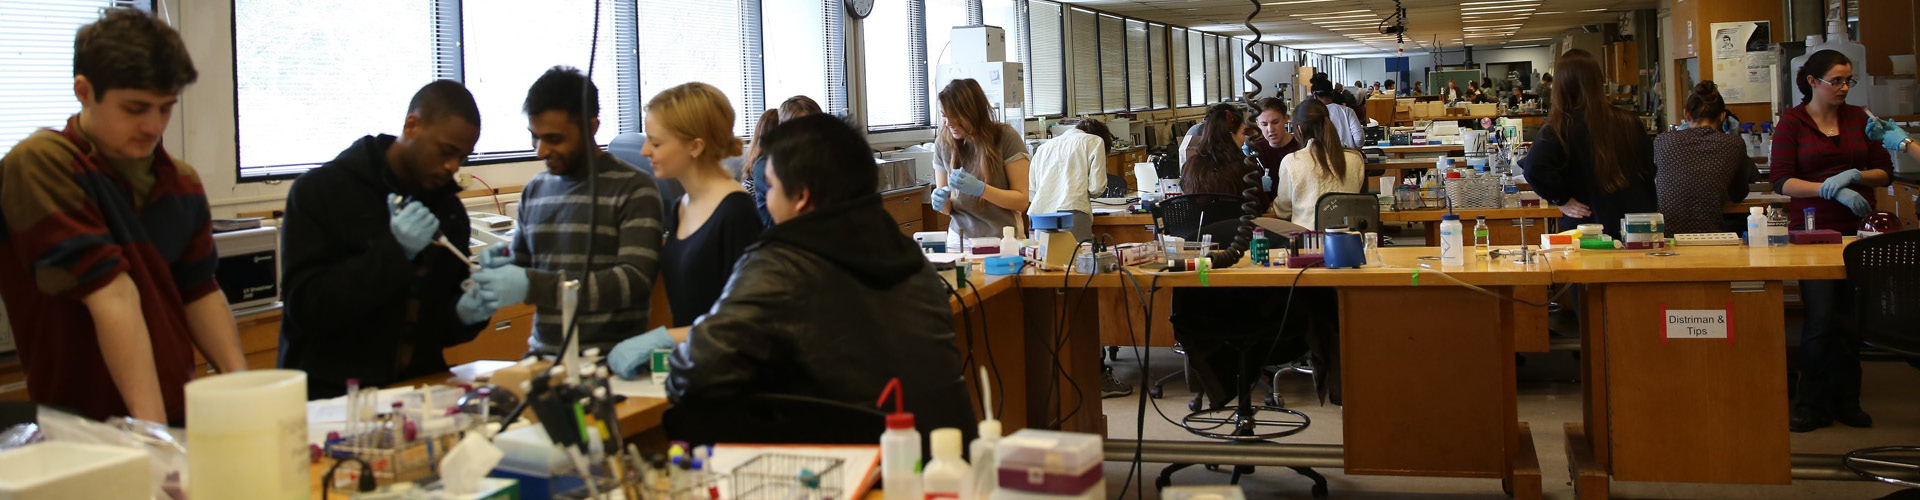 Hampshire College Students Working in a Science Lab